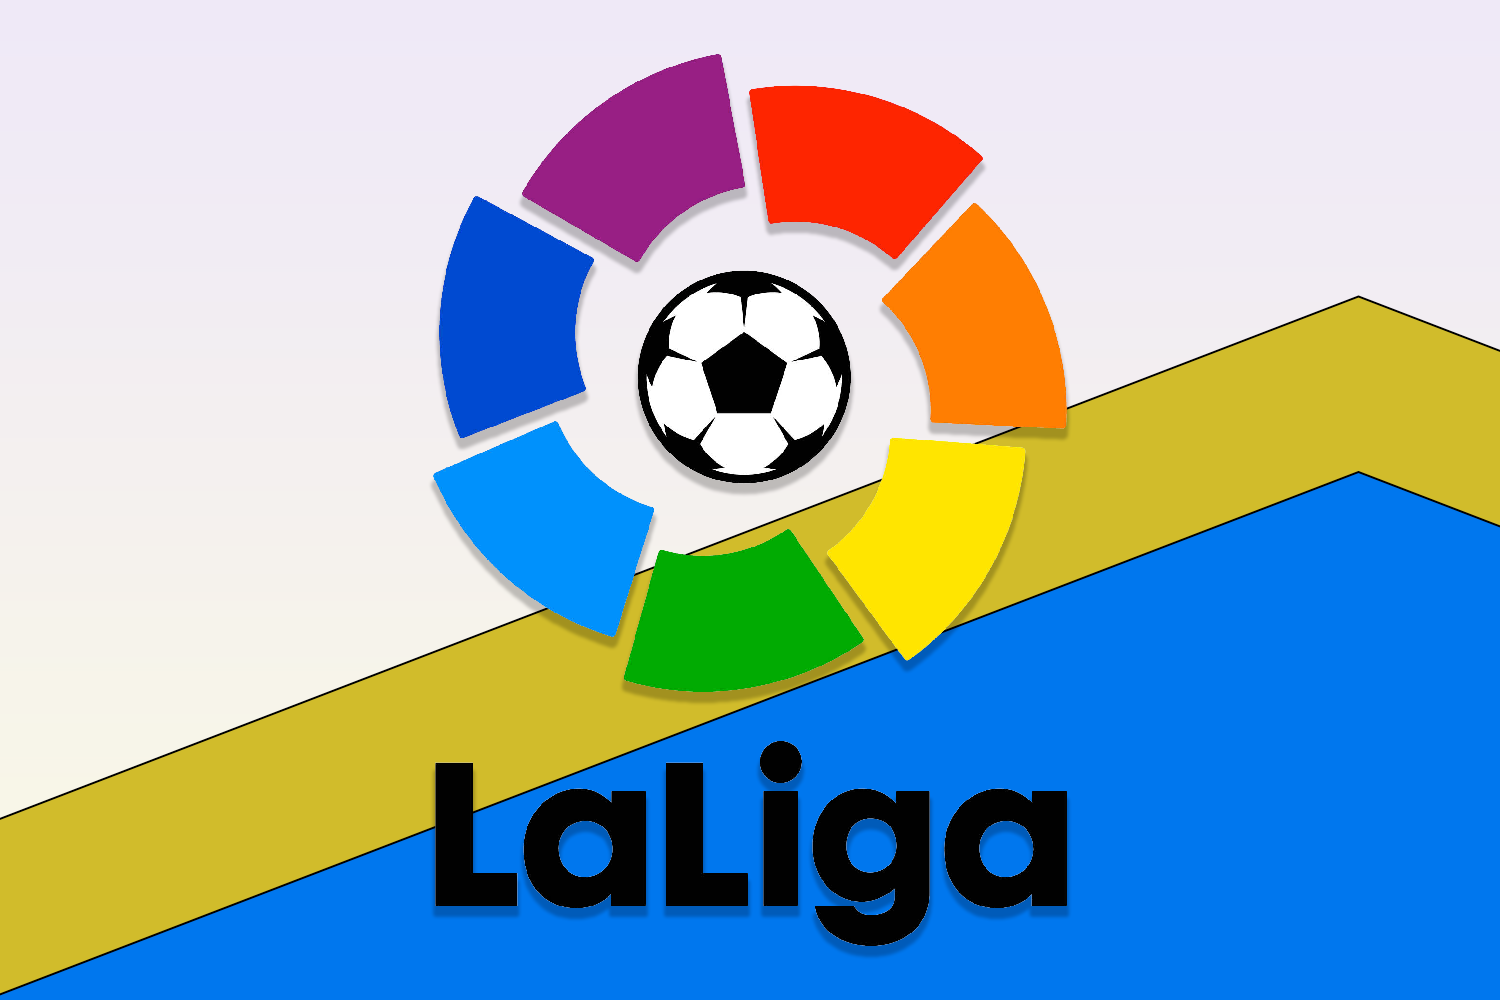 How to Watch LaLiga Streaming Live in the US Today - December 16